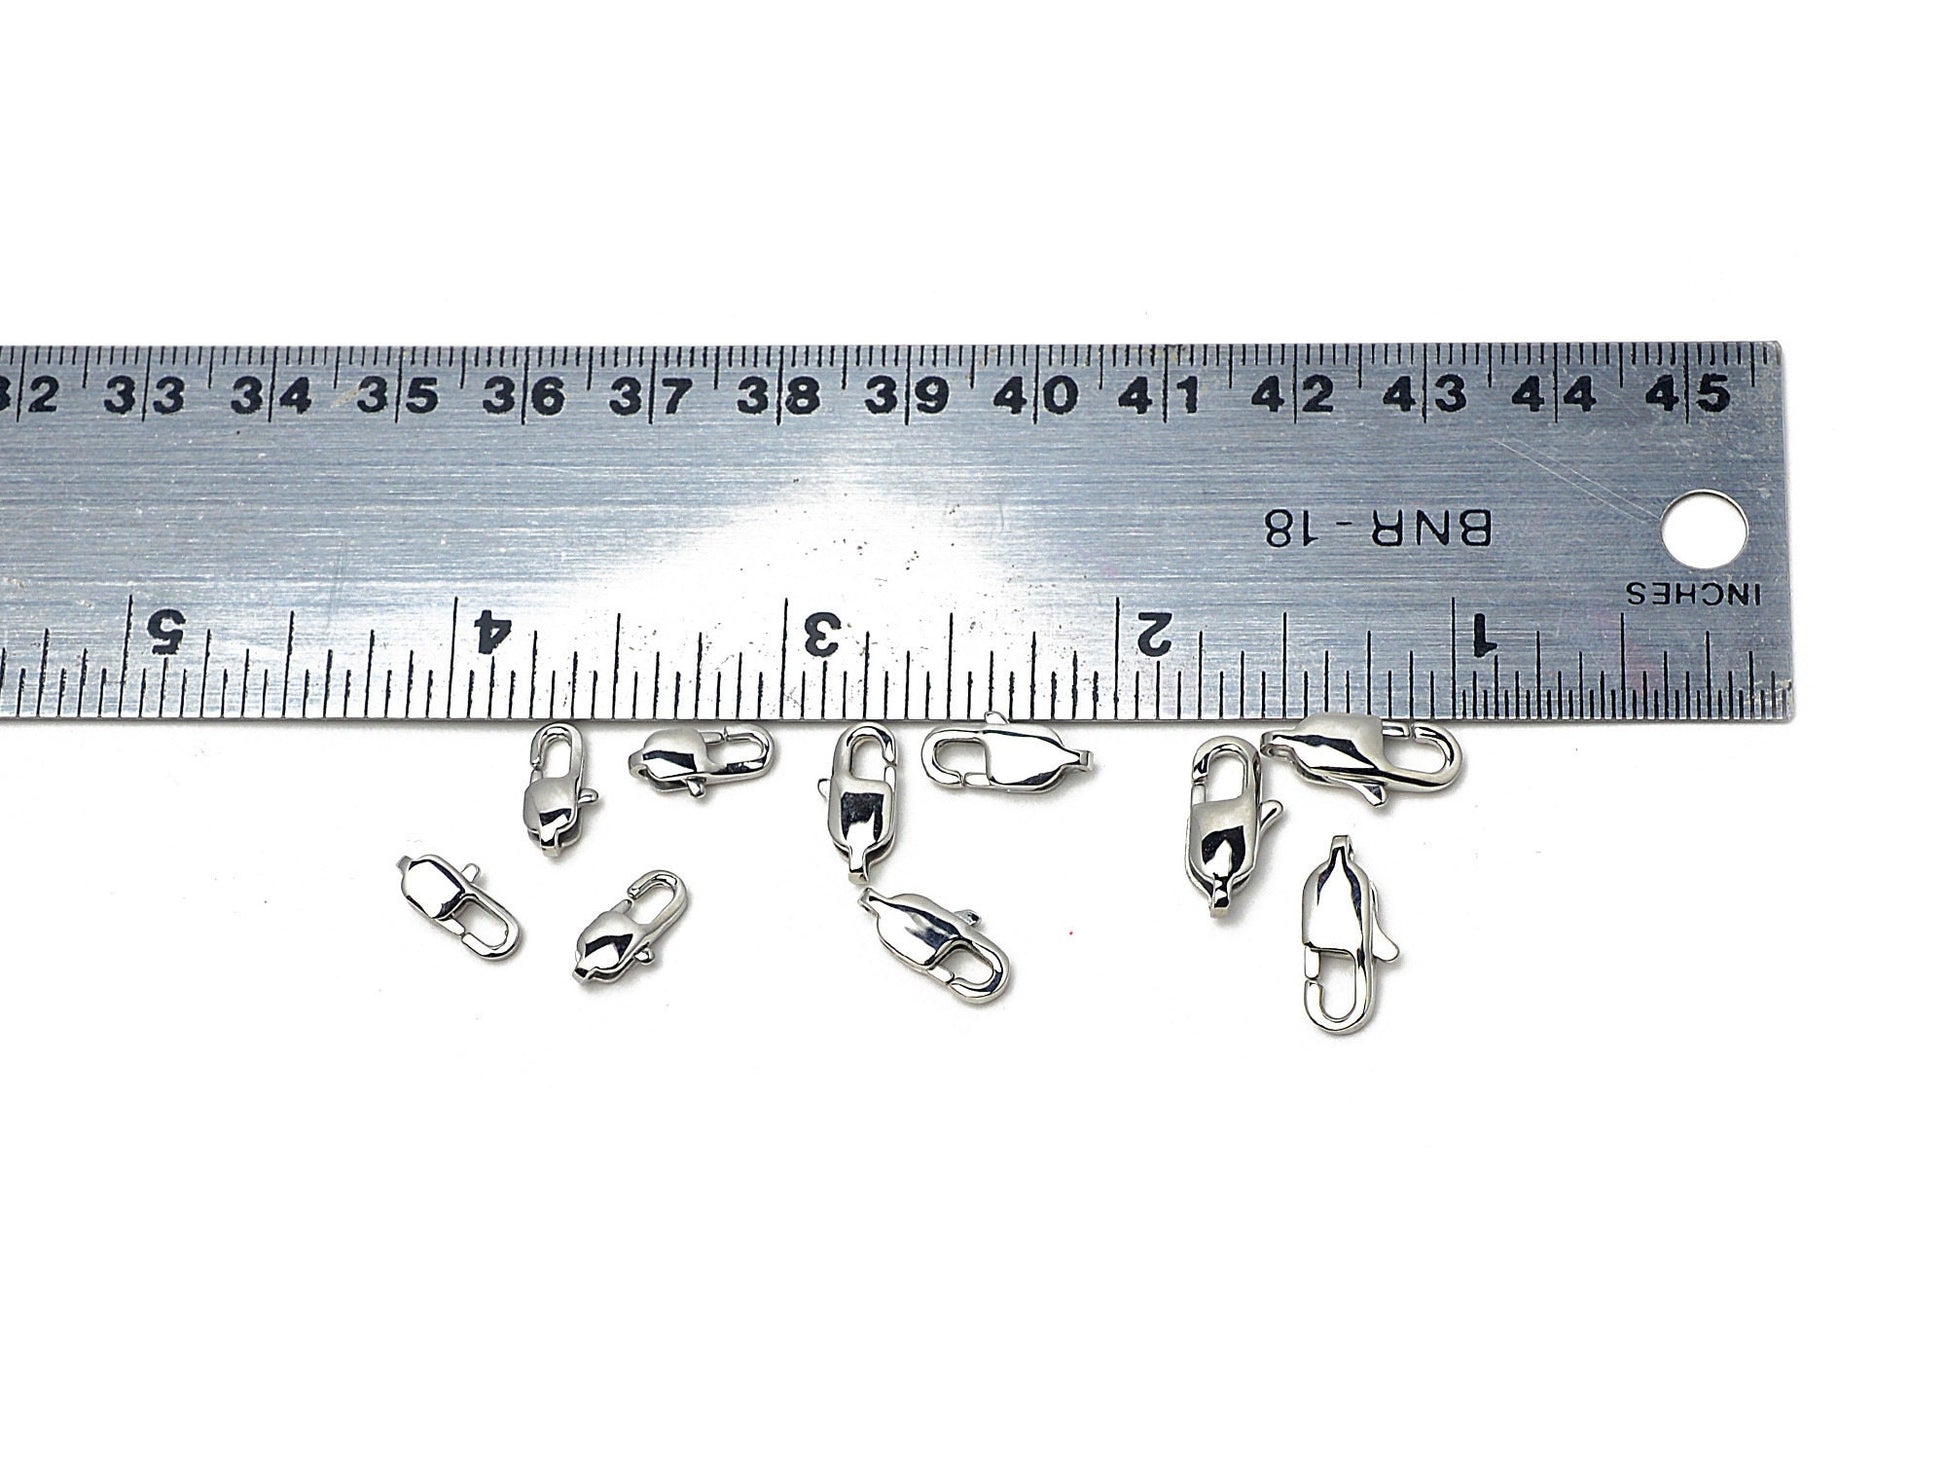 Stainless Steel Lobster Clasp 12PCs/Bag different Sizes 9x5mm/11x6mm/11x5mm/13x6mm/13x8mm/15x7mm Jewelry Finding Parts For Jewelry Making